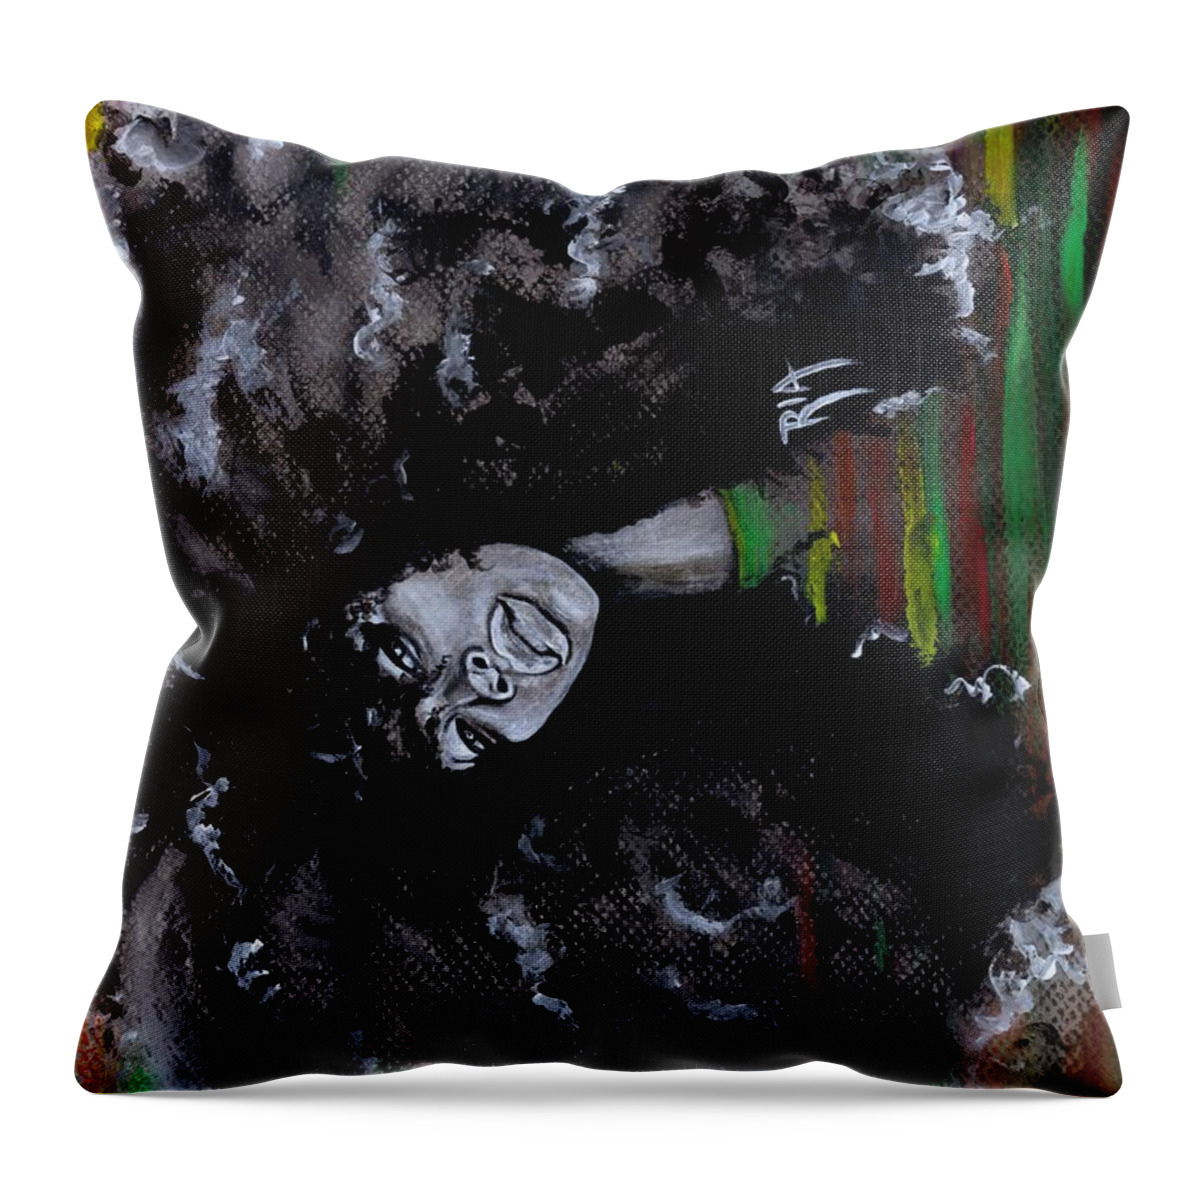 Erykah Badu Throw Pillow featuring the painting Ms Erykah Badu To You Fool by Artist RiA